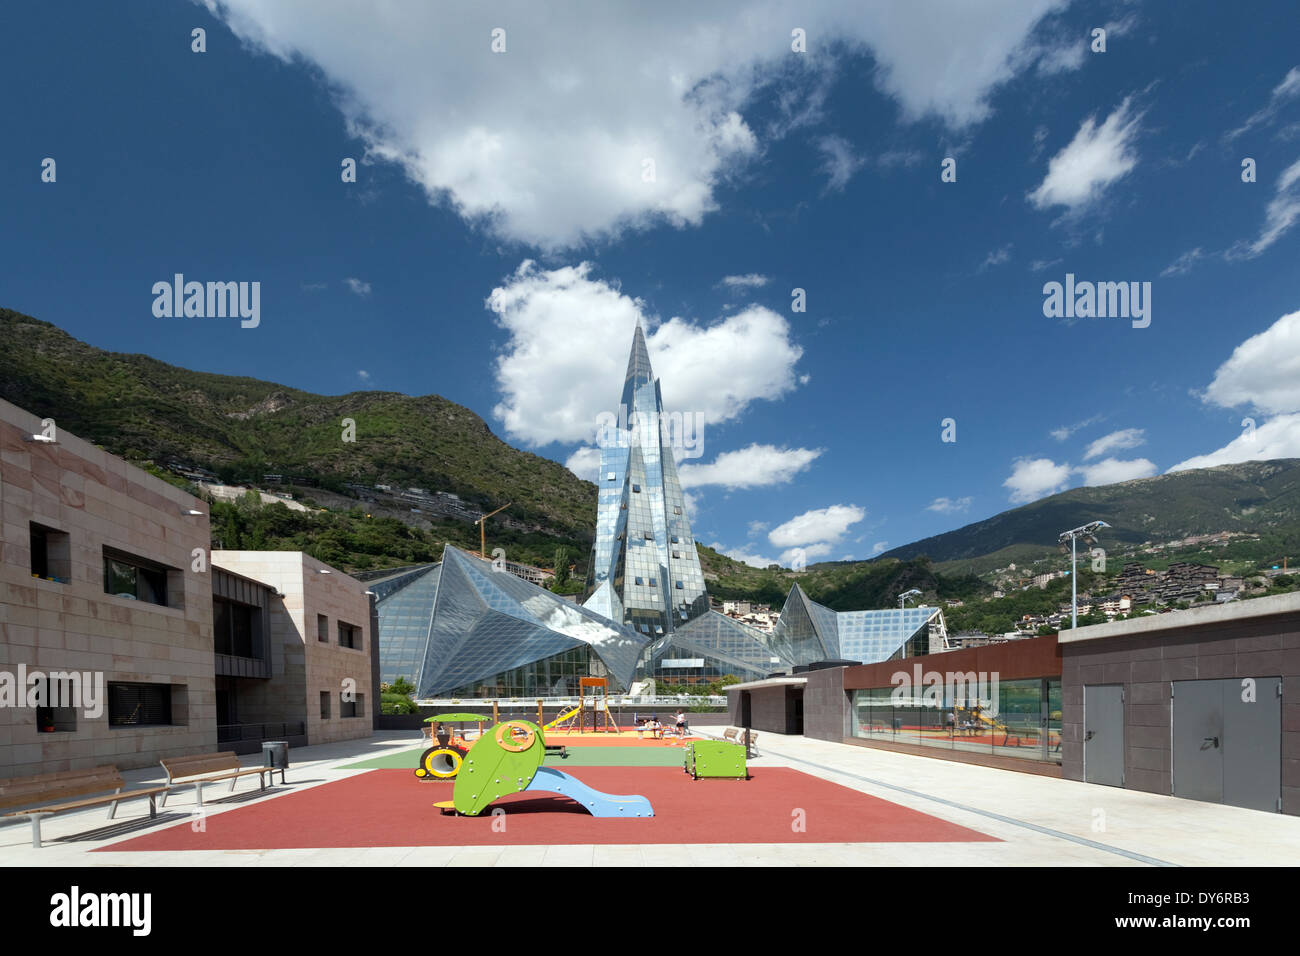 The glass covered spa Caldea in the country of Andorra la Vella as seen from a children's playground Stock Photo